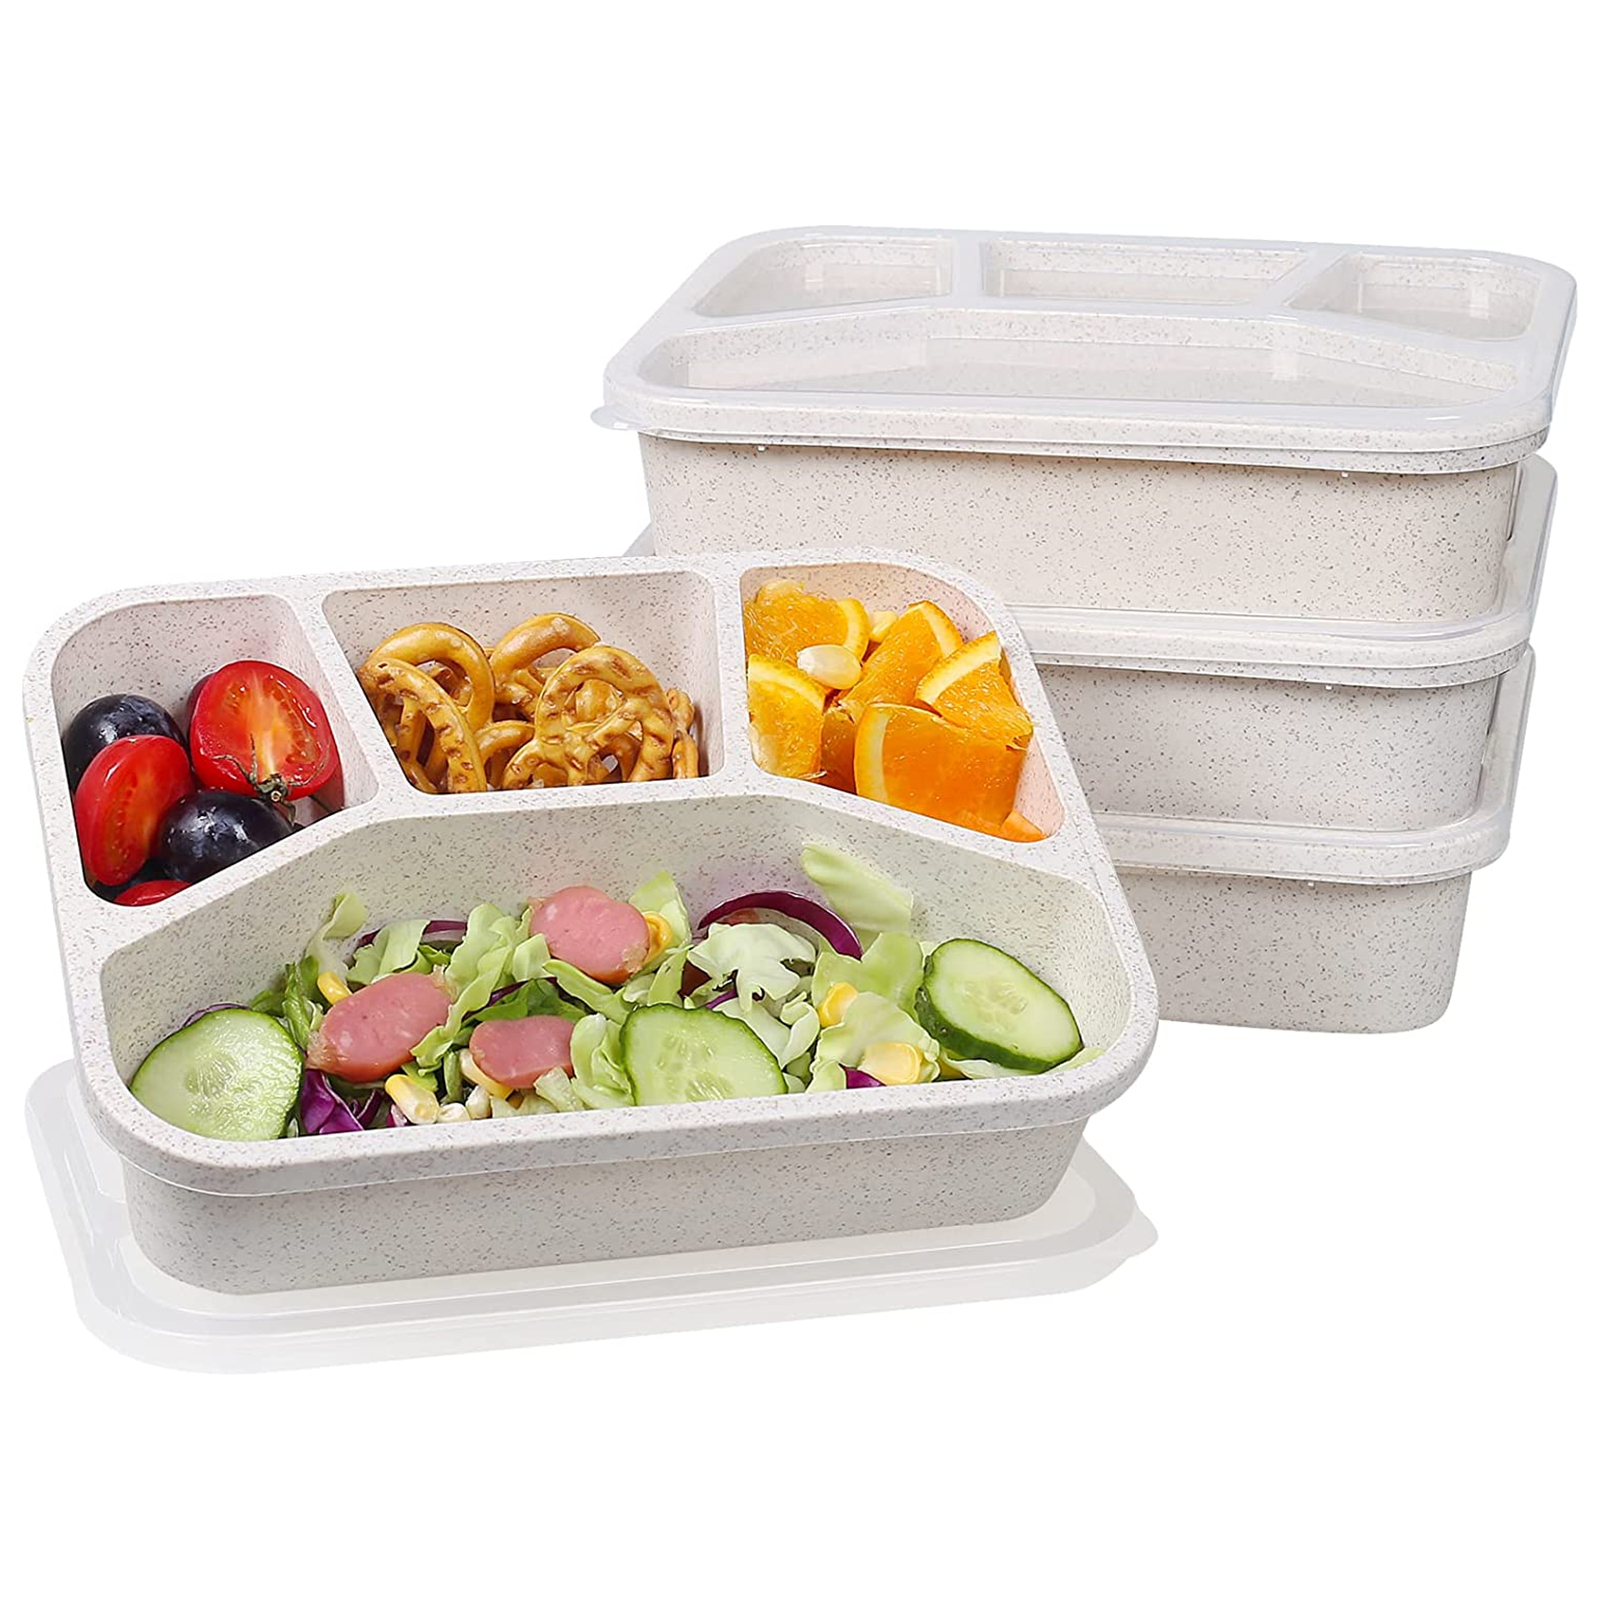 Shopwithgreen Meal Prep Plastic Lunch Containers with 4 Compartments 4 pcs  - Creamy White